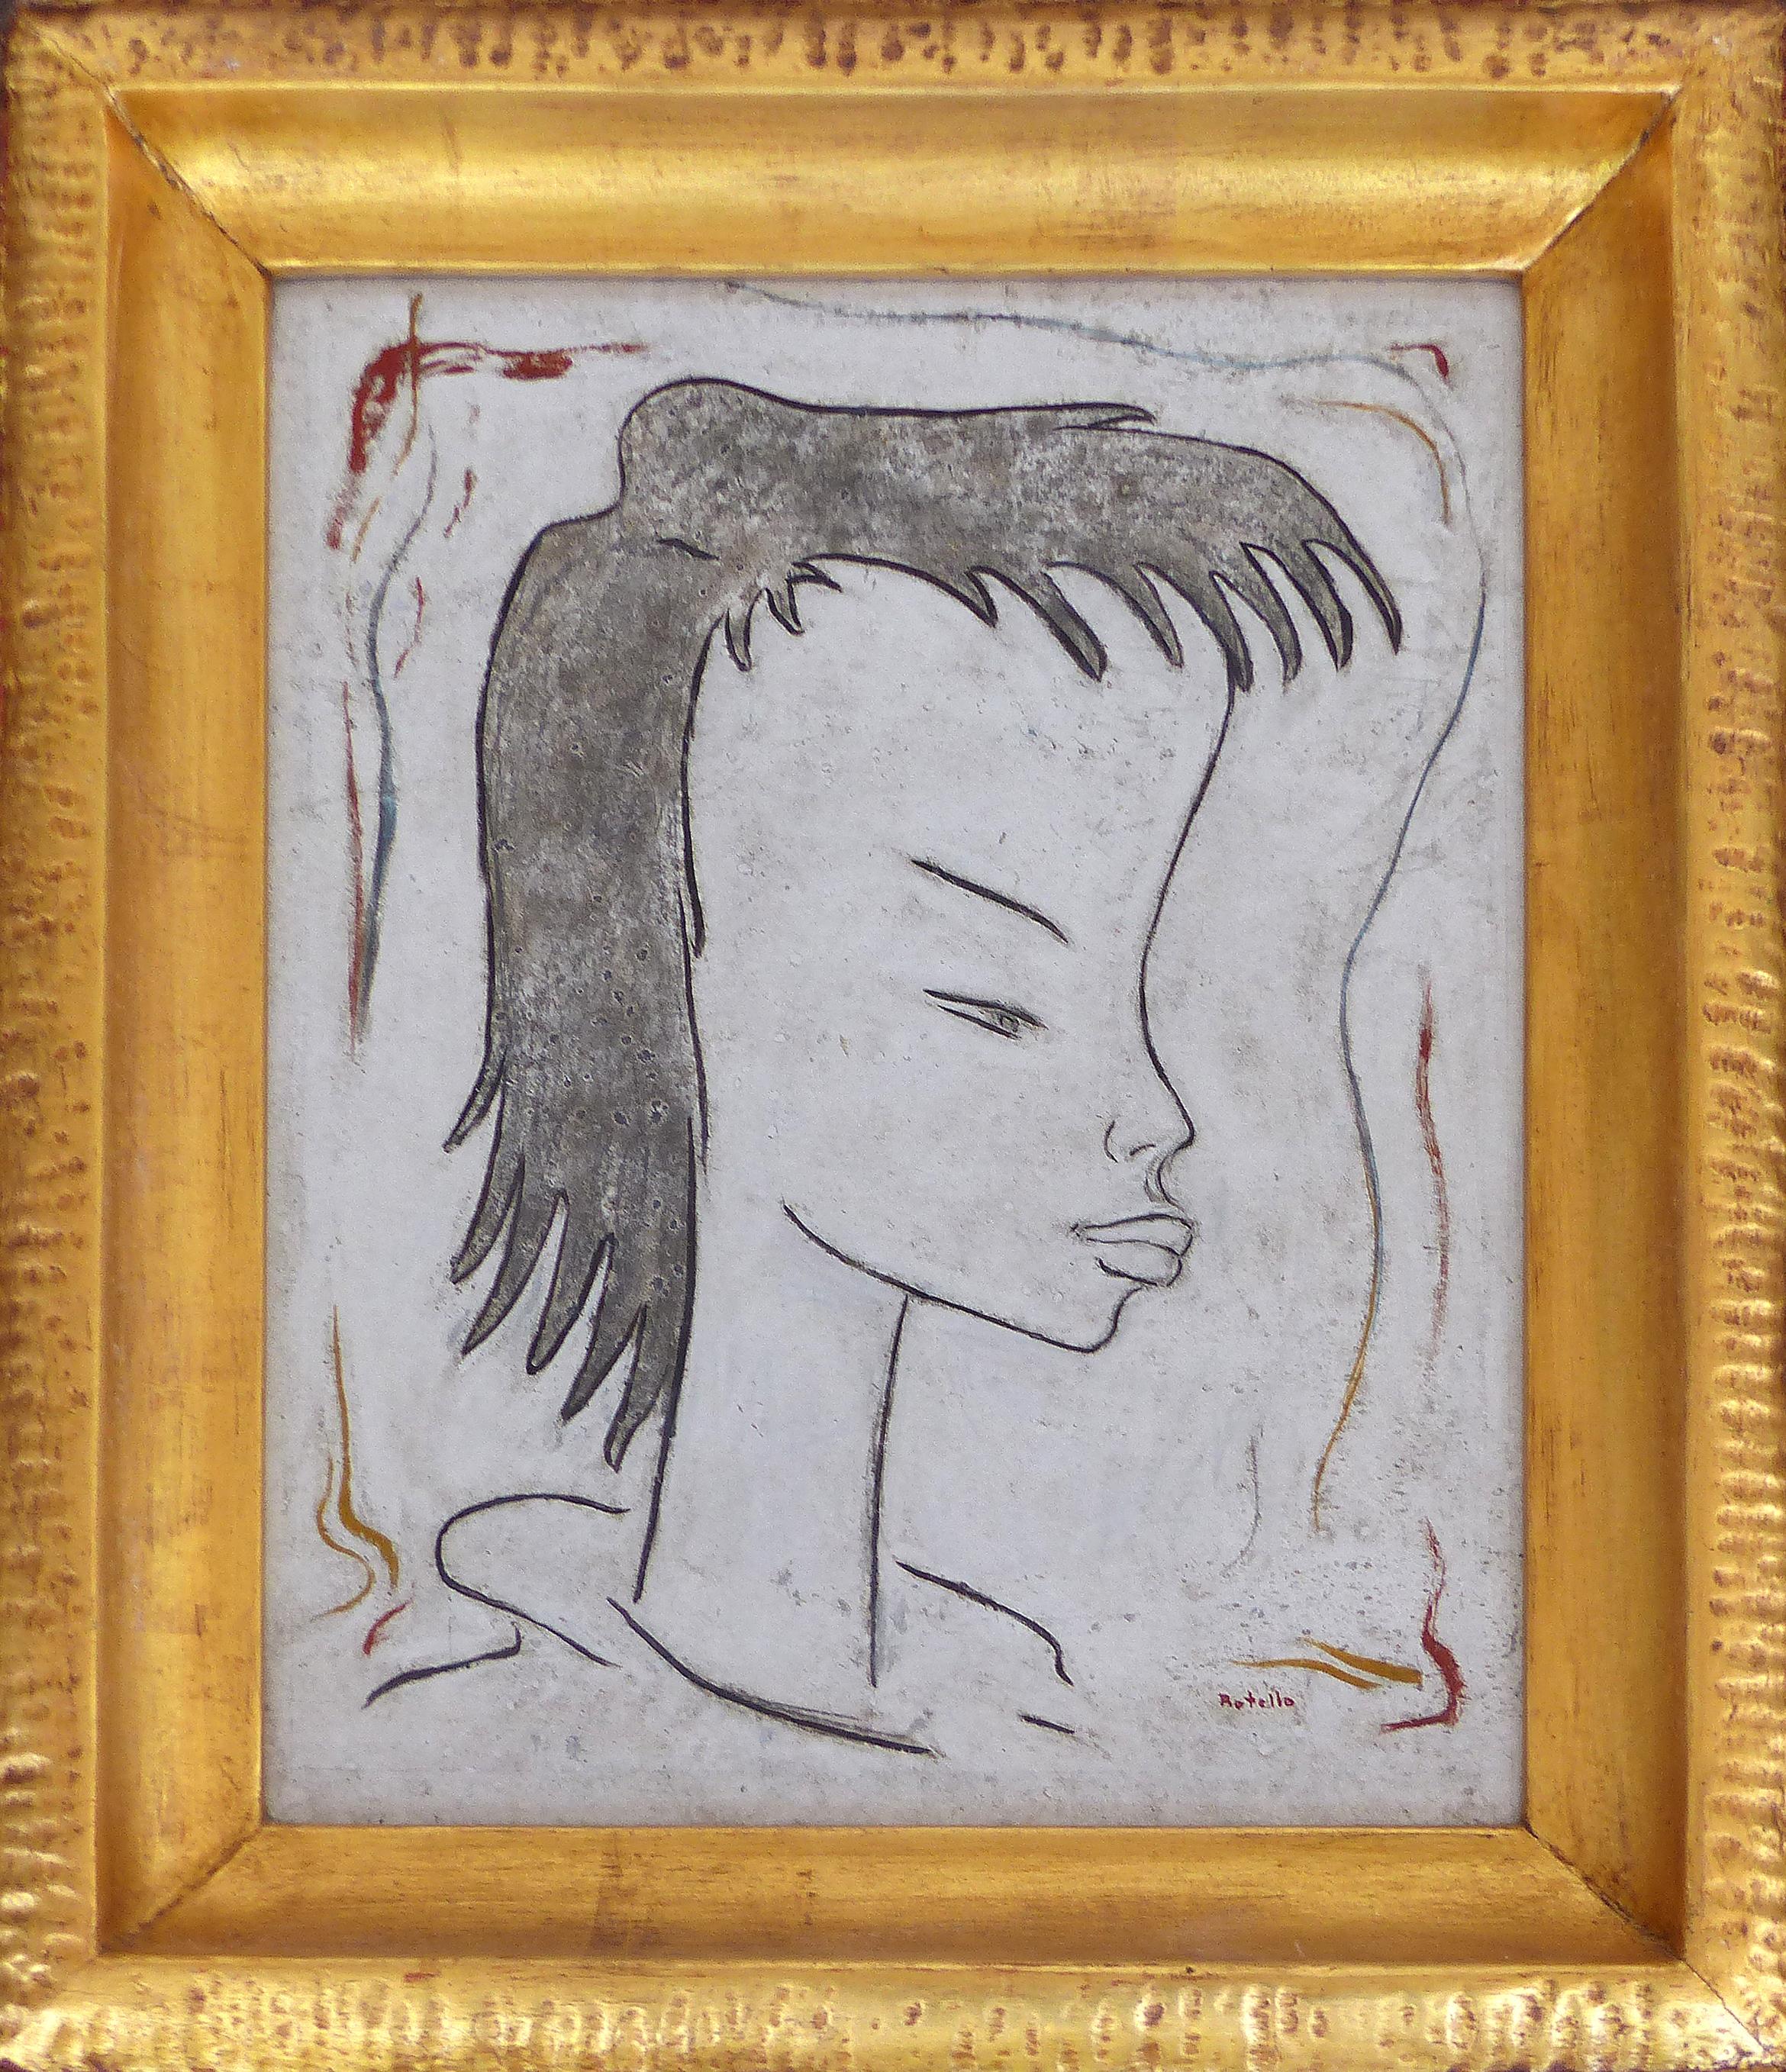 Angel Botello Abstract Oil Painting on Board, Latin Artist

Offered for sale is an oil painting on board by Spanish/Puerto Rican artist Angel Botello (June 20, 1913 – November 11, 1986). The work is presenred a hand carved frame by Teofilo Batista